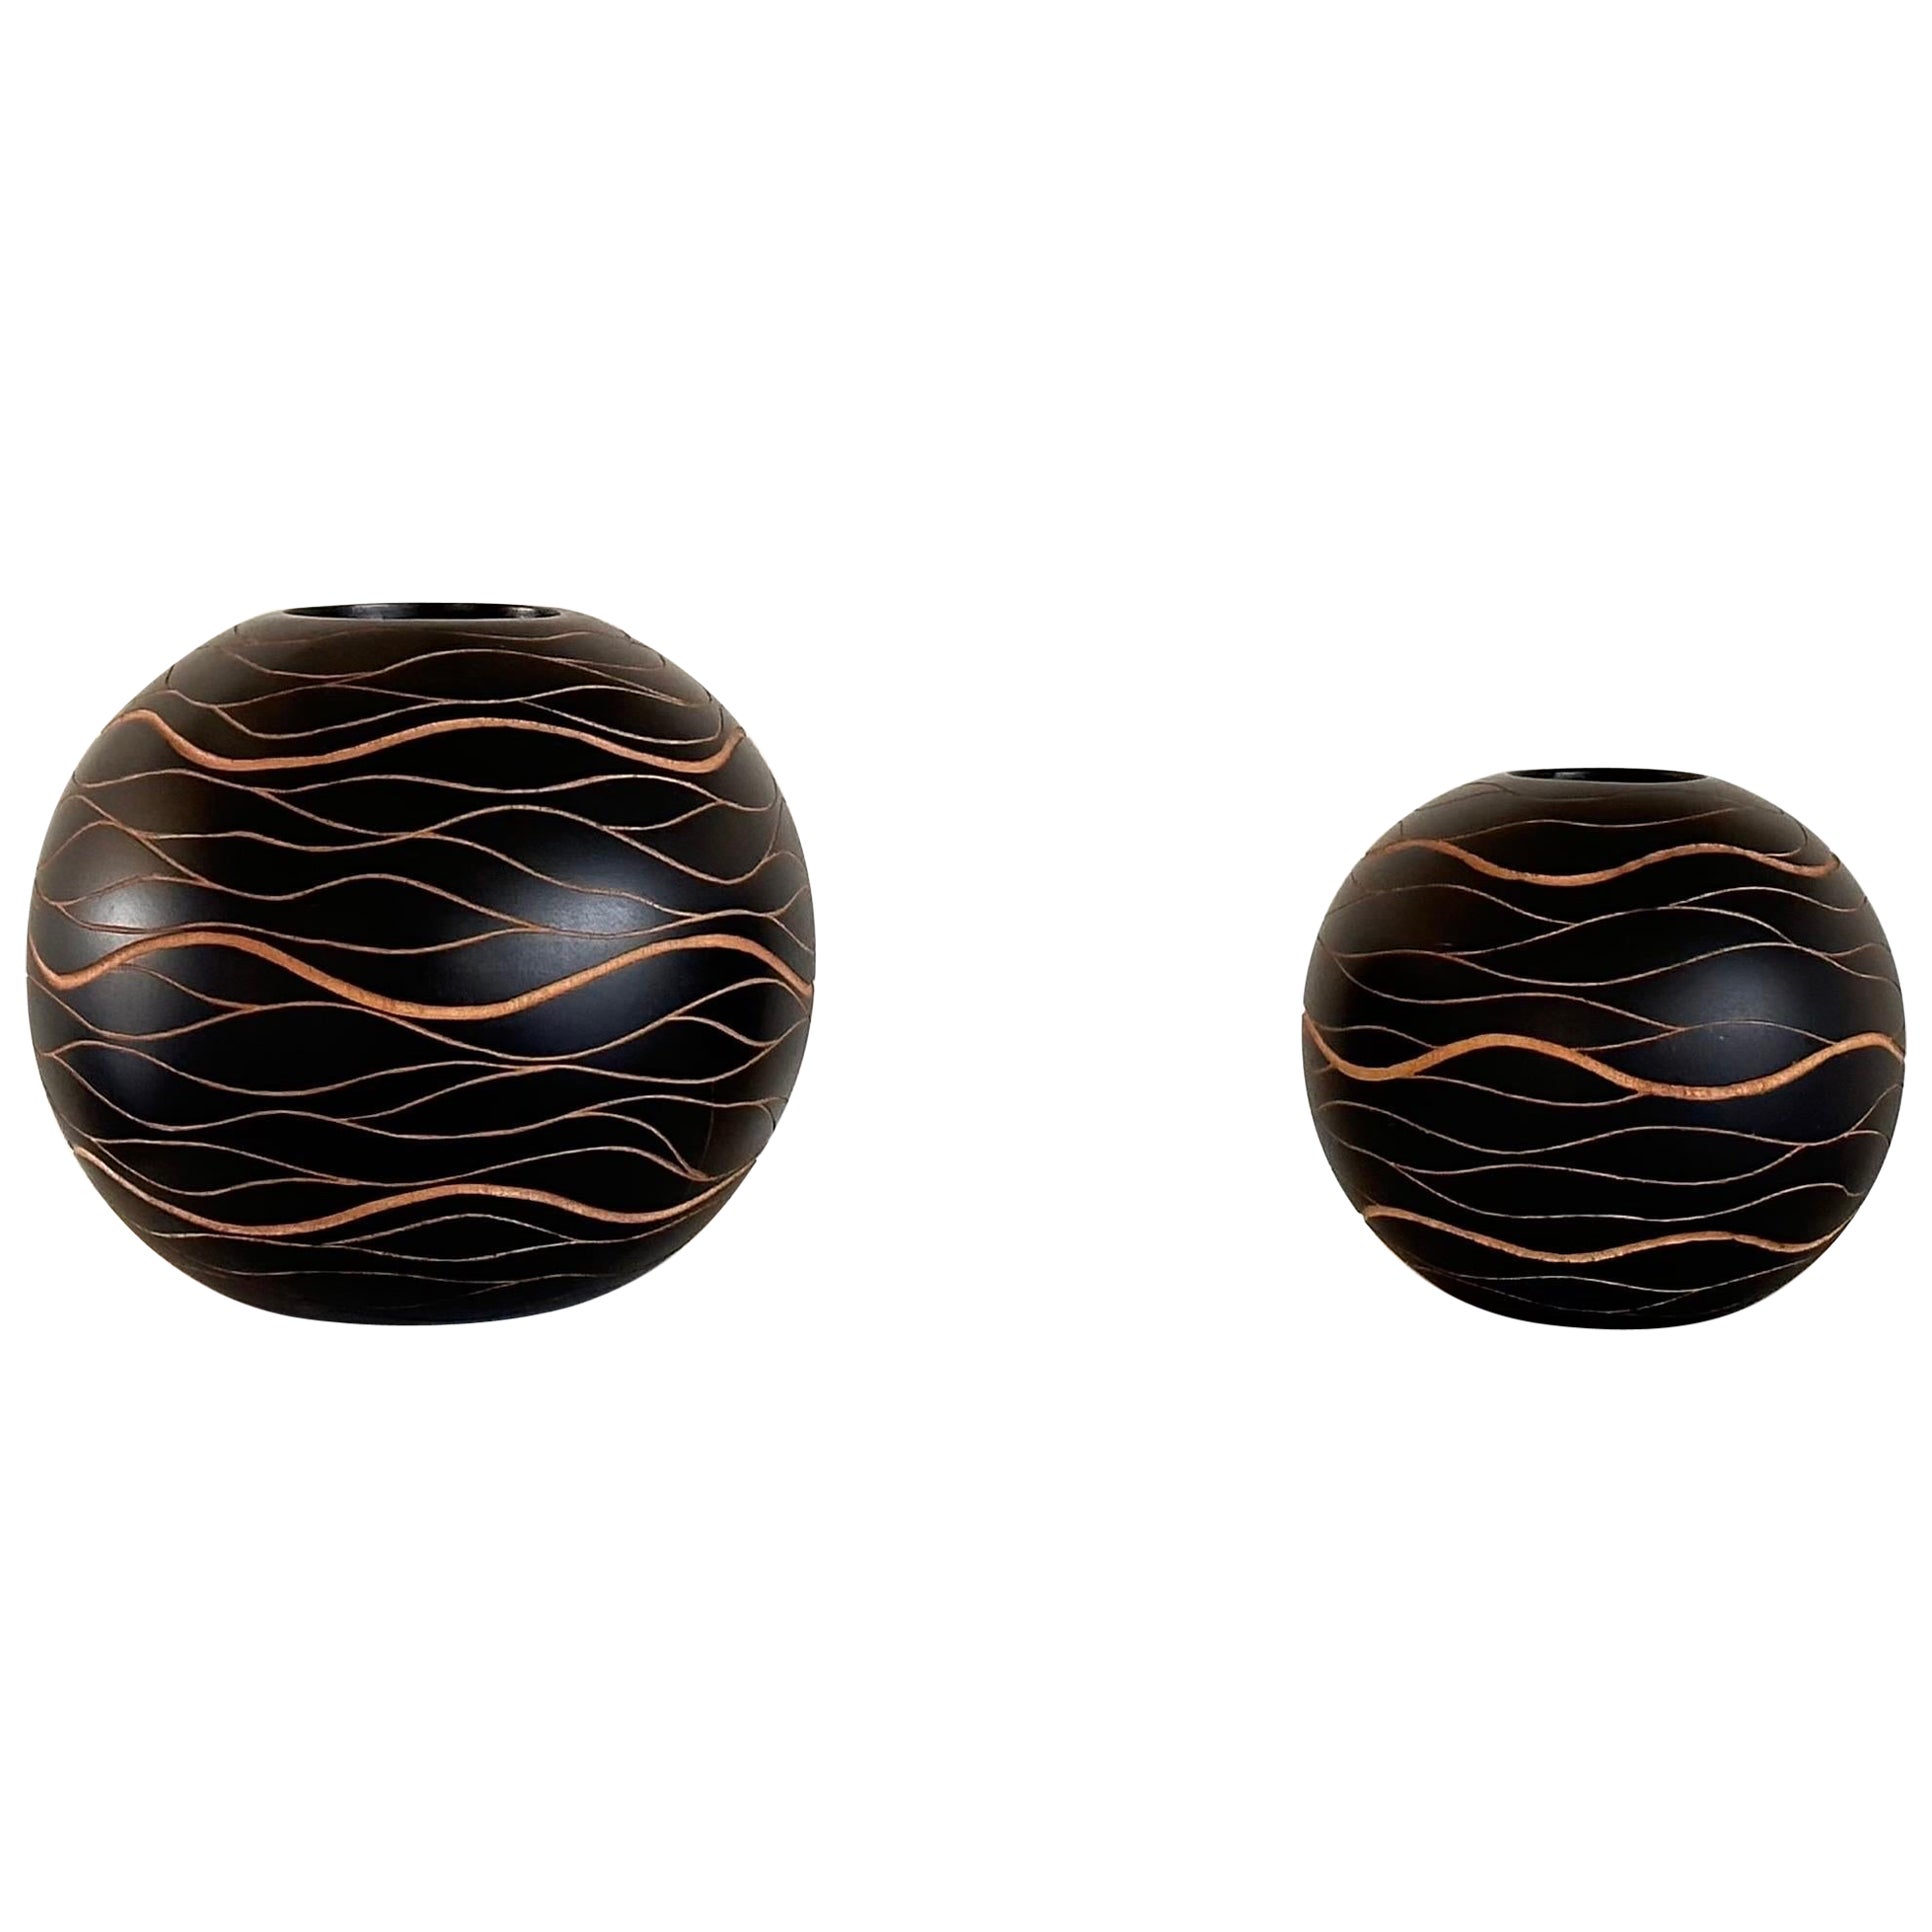 Italian Hand-Crafted Wooden Sphere Vases with Wavy Line Ornamentation, 1980s For Sale